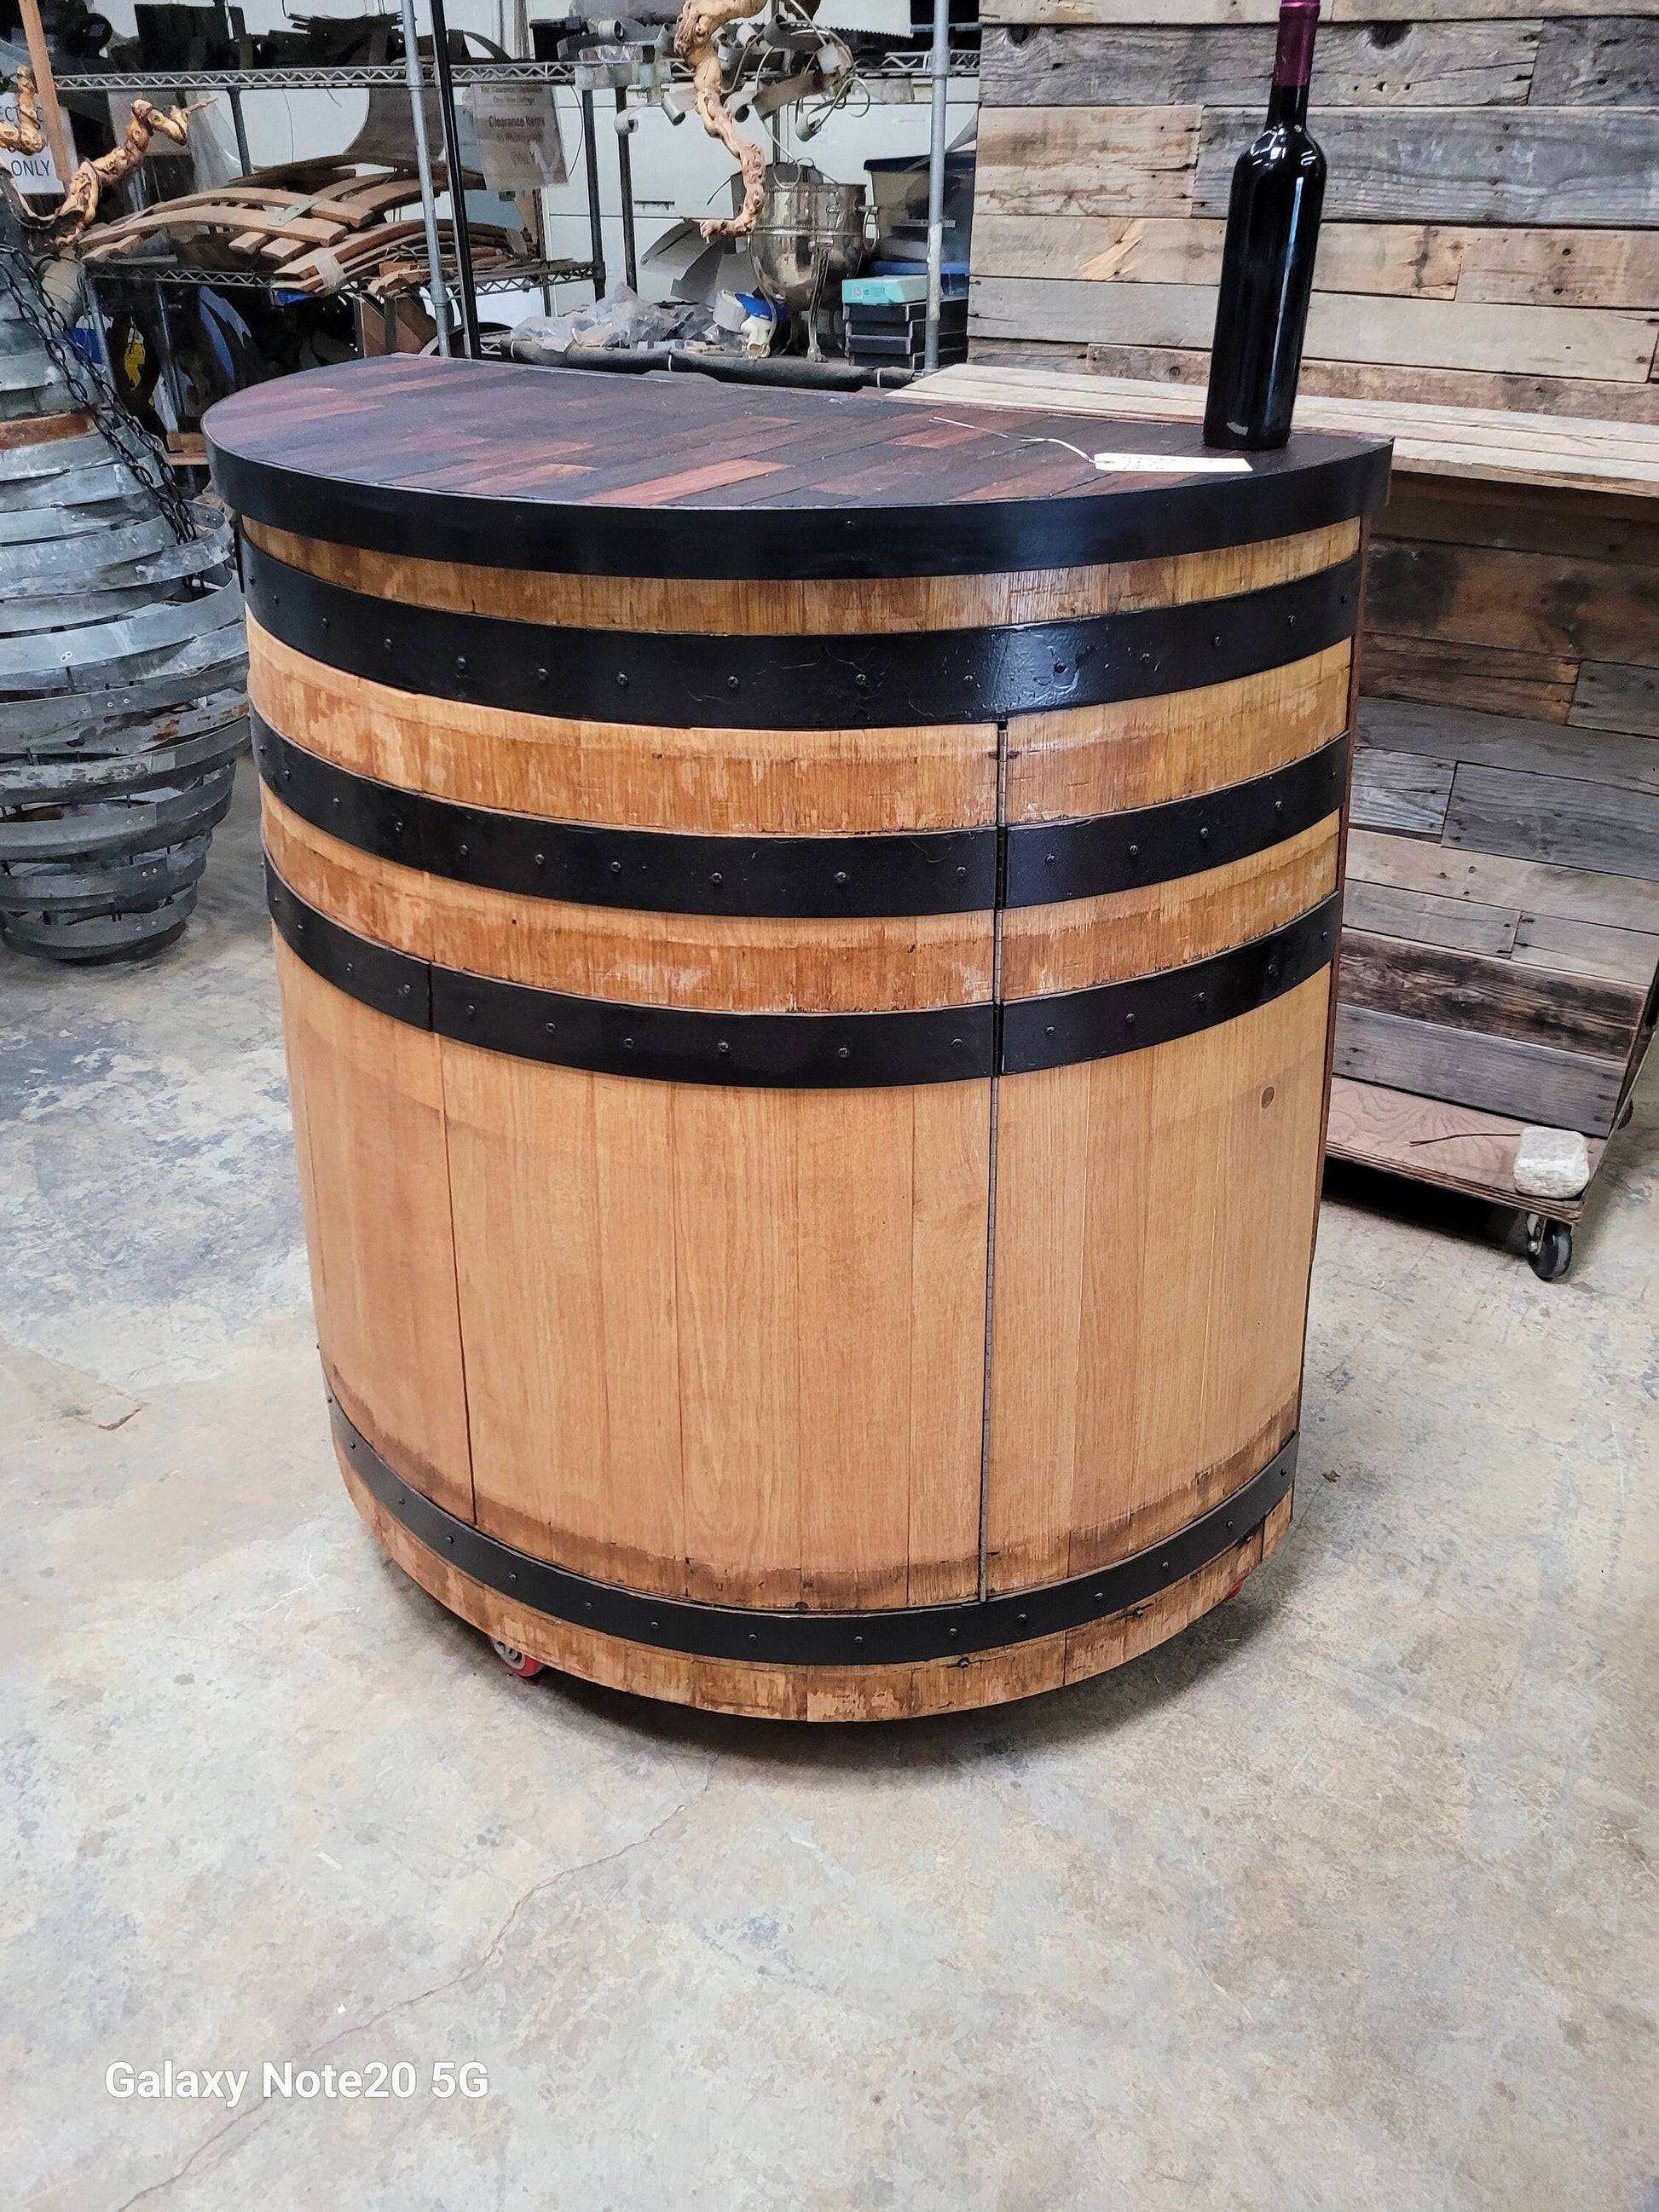 Custom Liquor Cabinet / Bar #1 of 2 Extremely Limited - made from retired Napa wine barrels. 100% Recycled! 090923-2